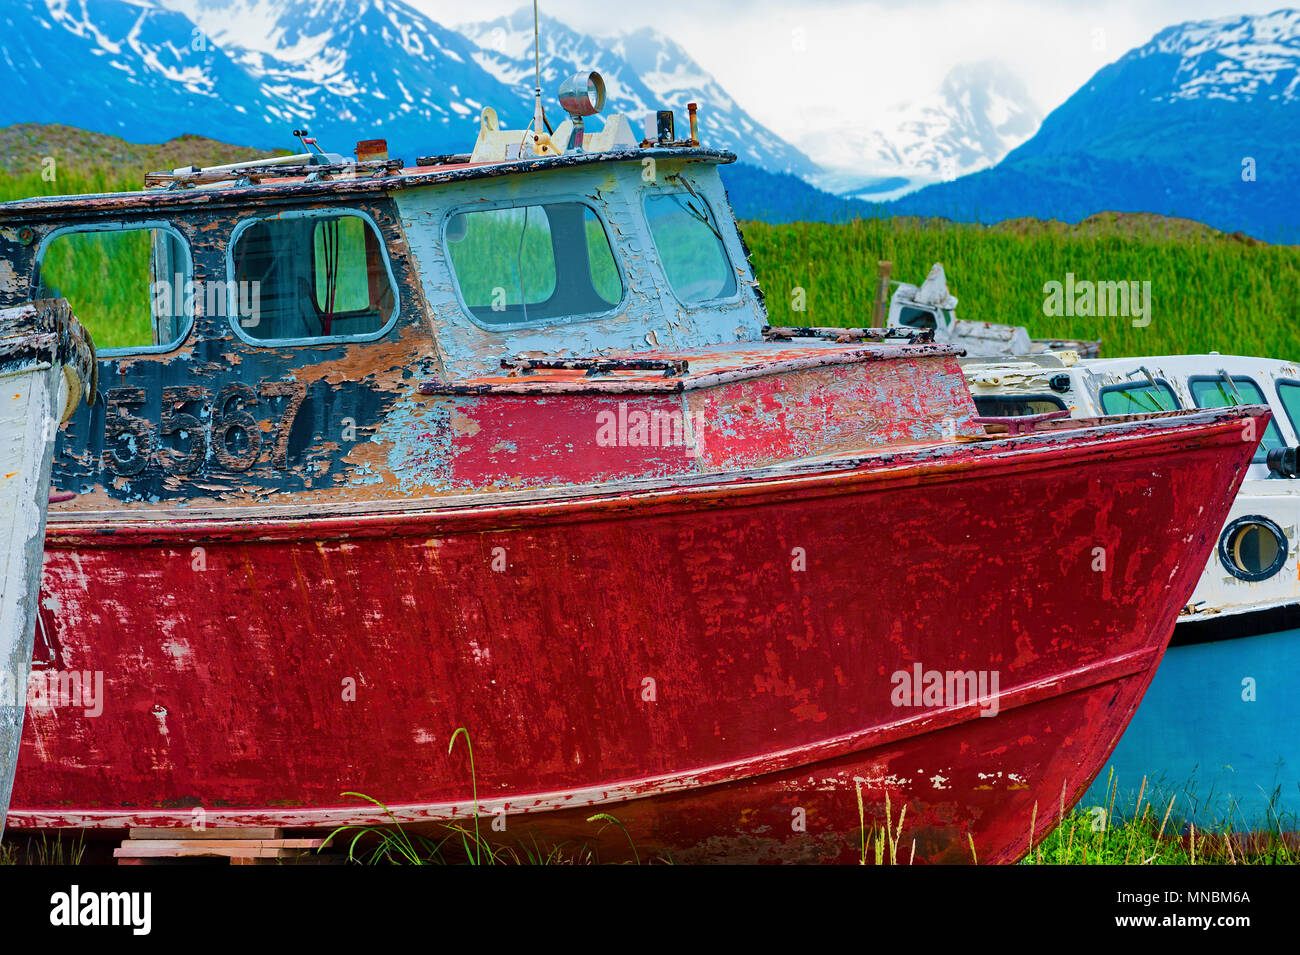 Decaying abandoned boats in a grassy field seen from walking path along the shores of Kachemak Bay in Homer Alaska. Stock Photo